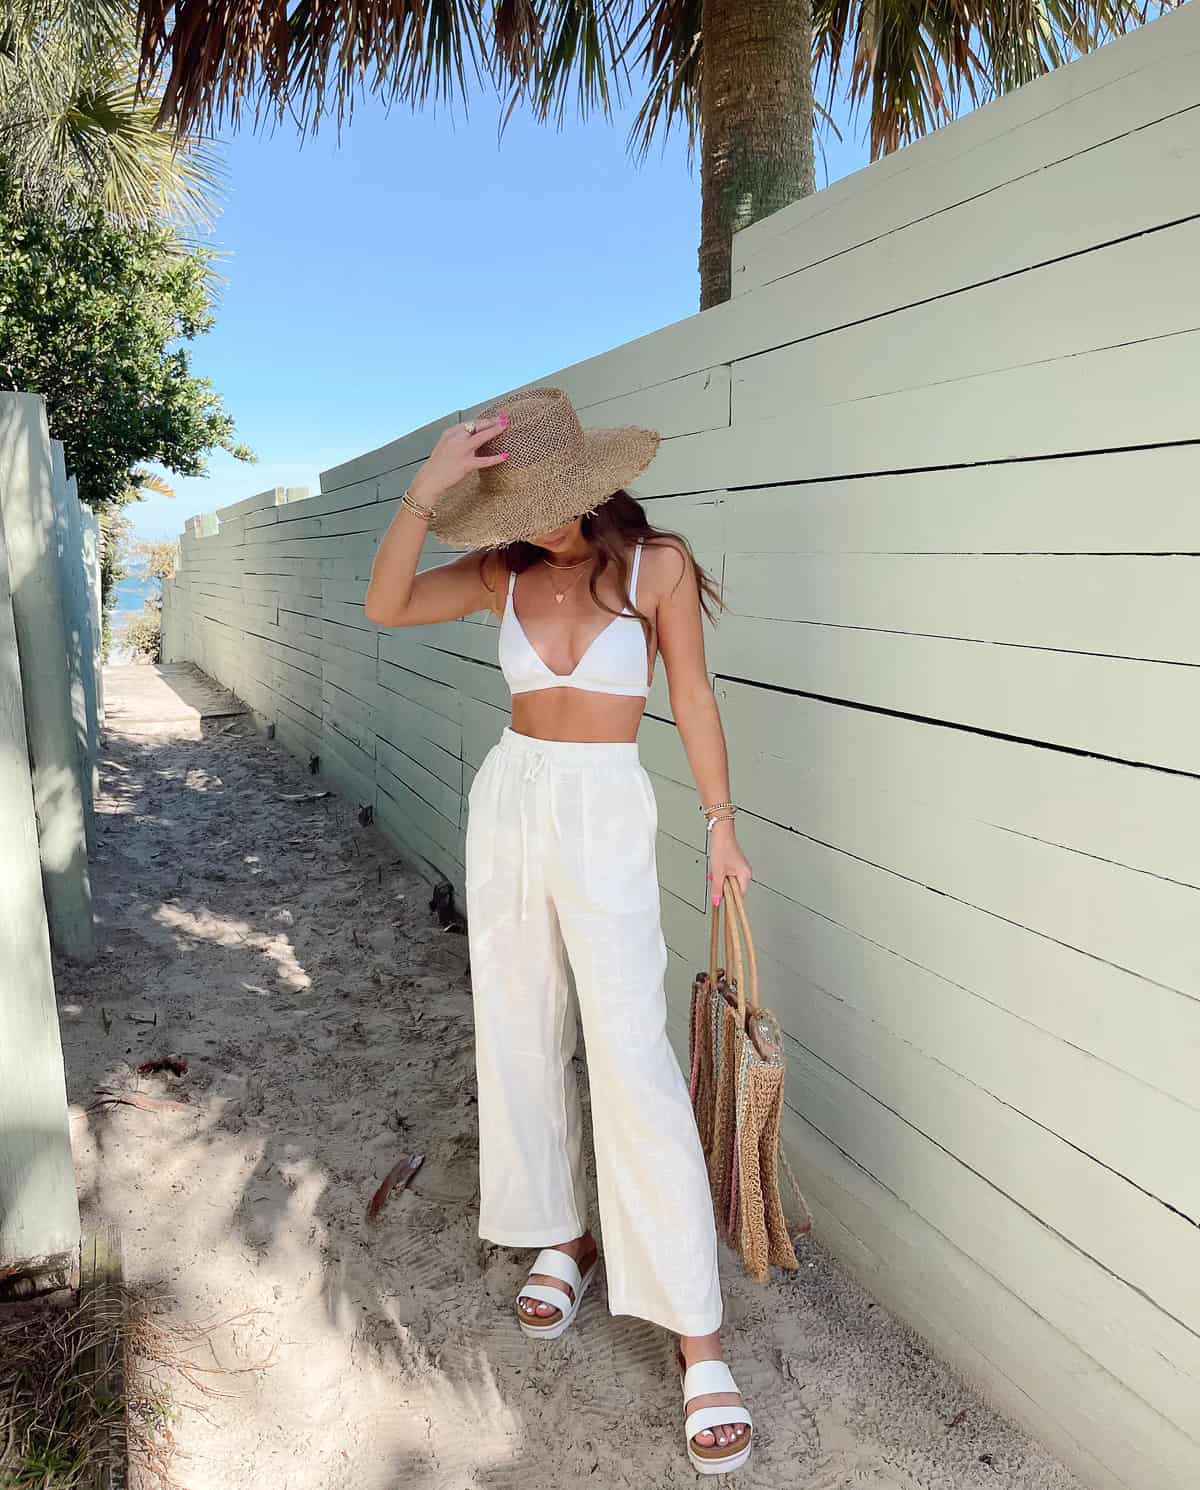 An image of a woman with white linen pants, chunky sandals, a white bikini top, and a straw hat and tote bag